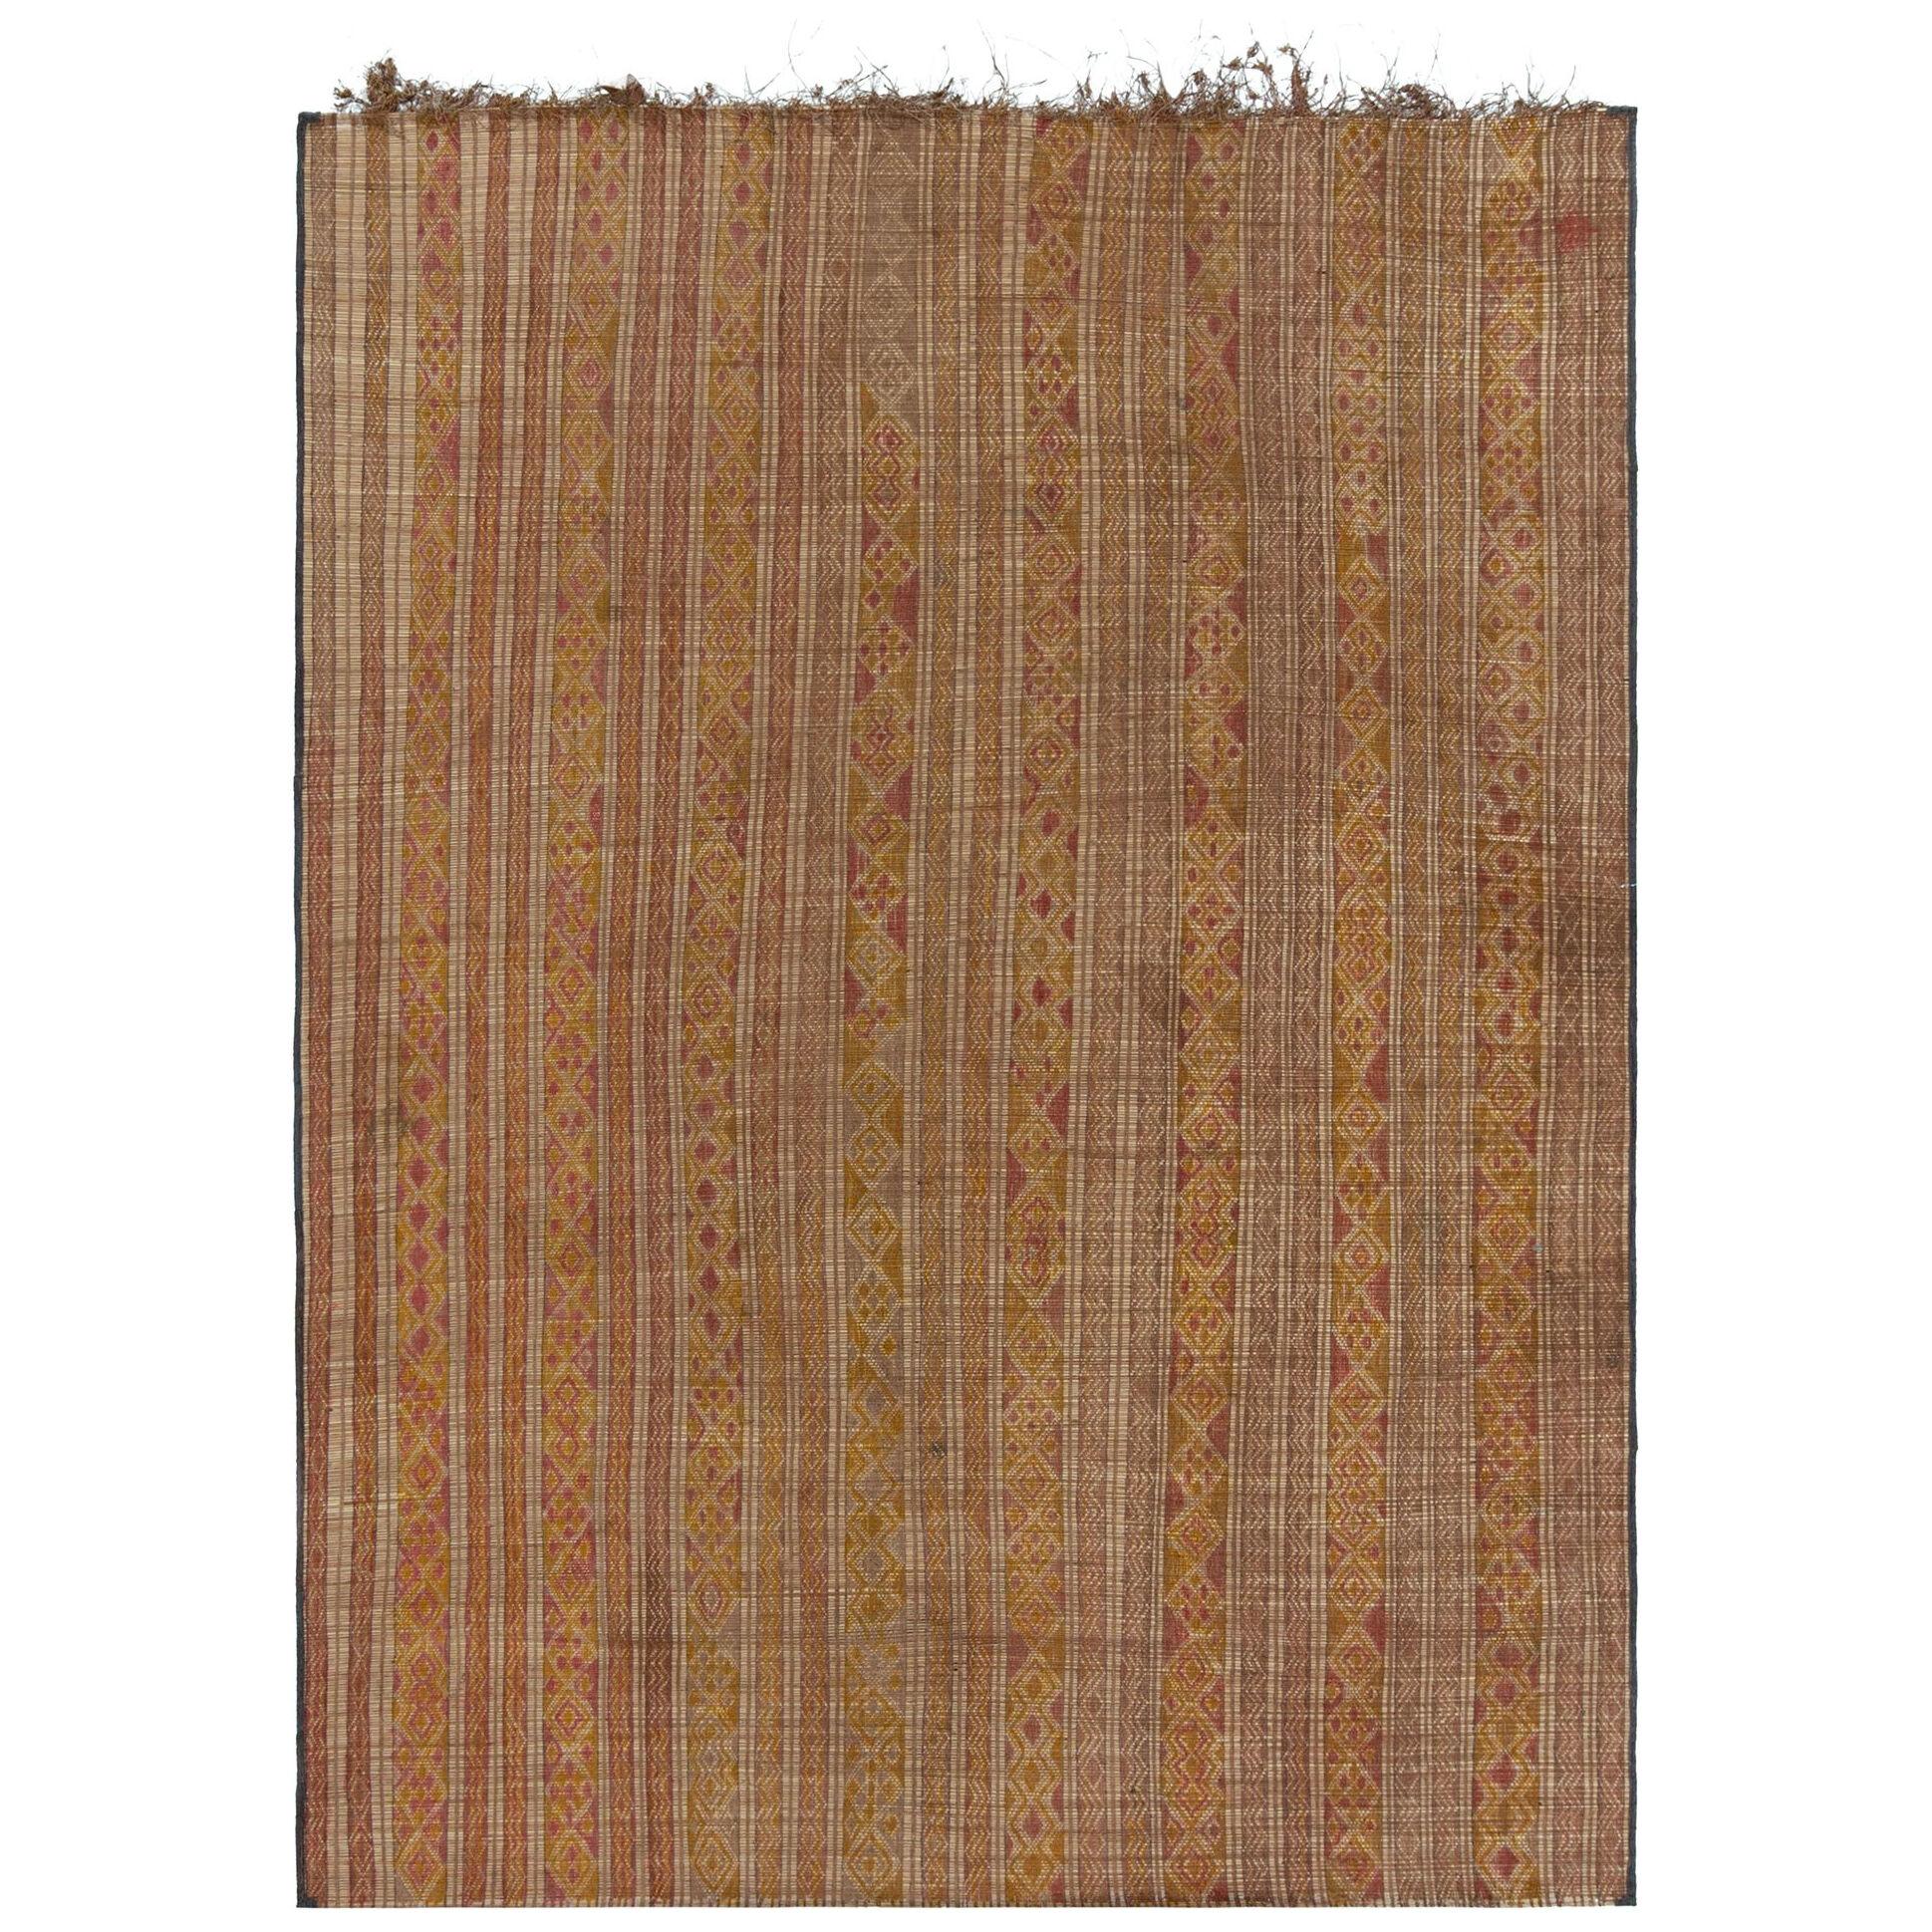 Vintage Moroccan Tuareg Mat in Beige-Brown, Pink and Yellow Tribal Pattern